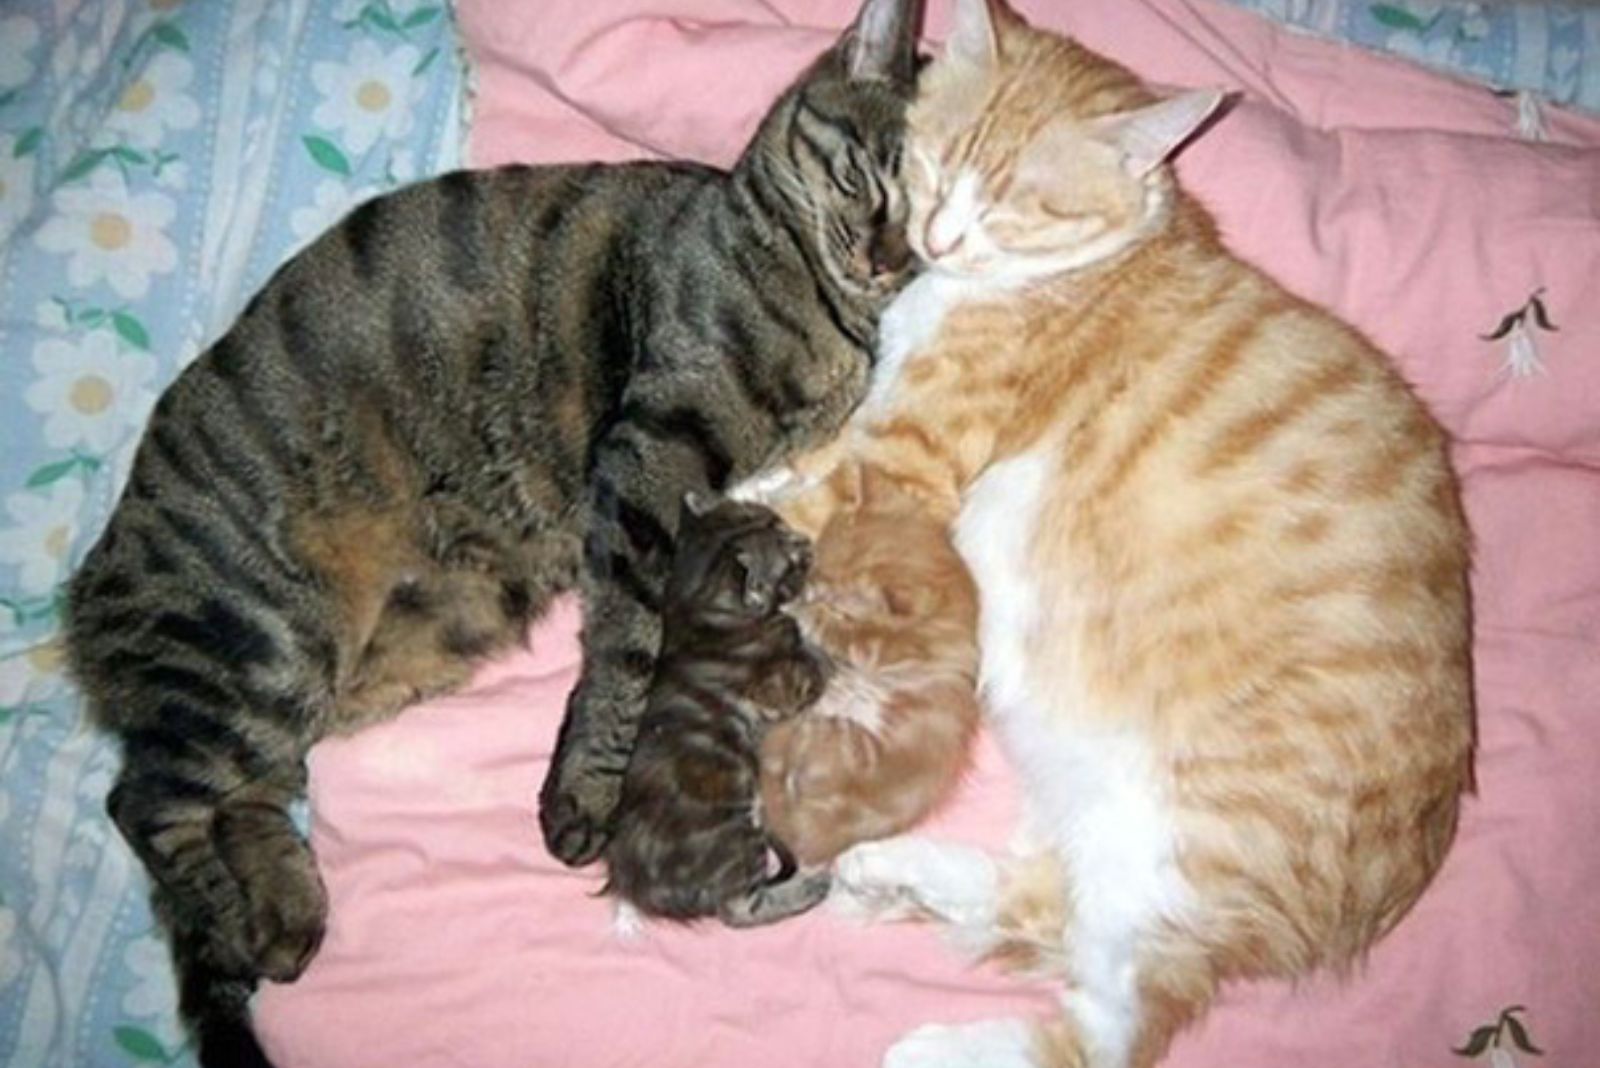 Two cats and two kittens